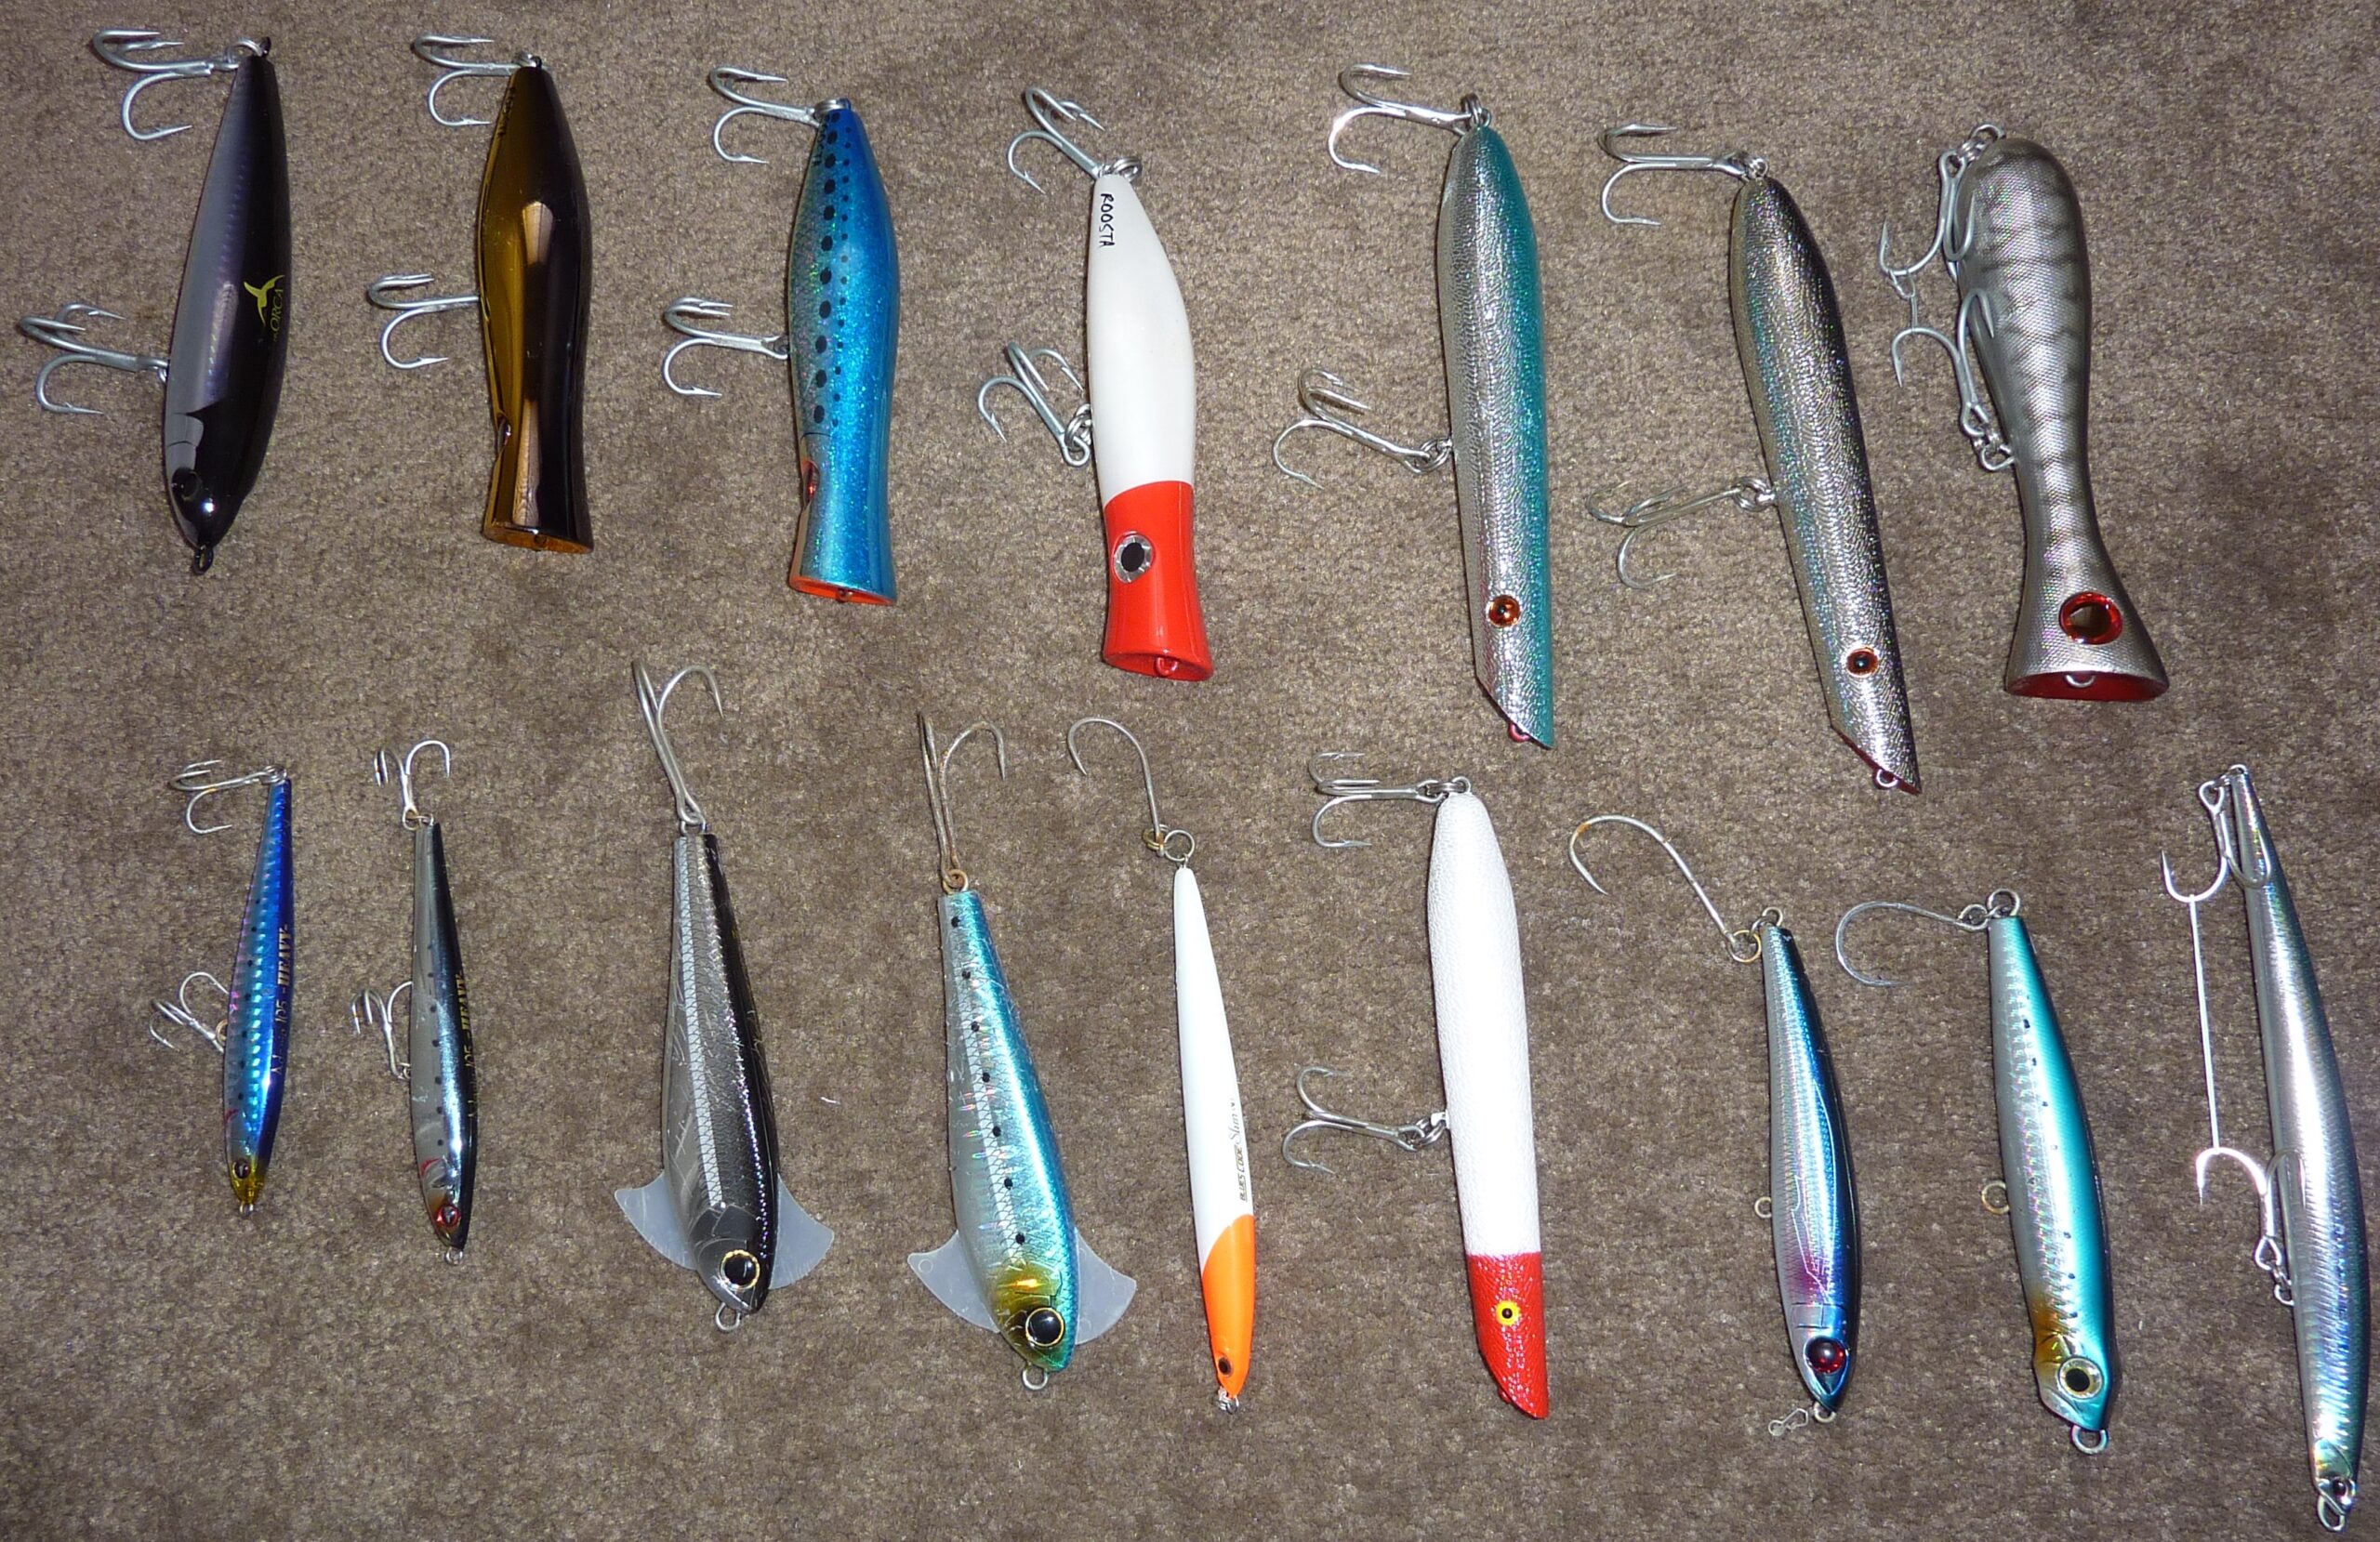 Crankbaits For Fishing: Types, Techniques, Features - Yellow Bird